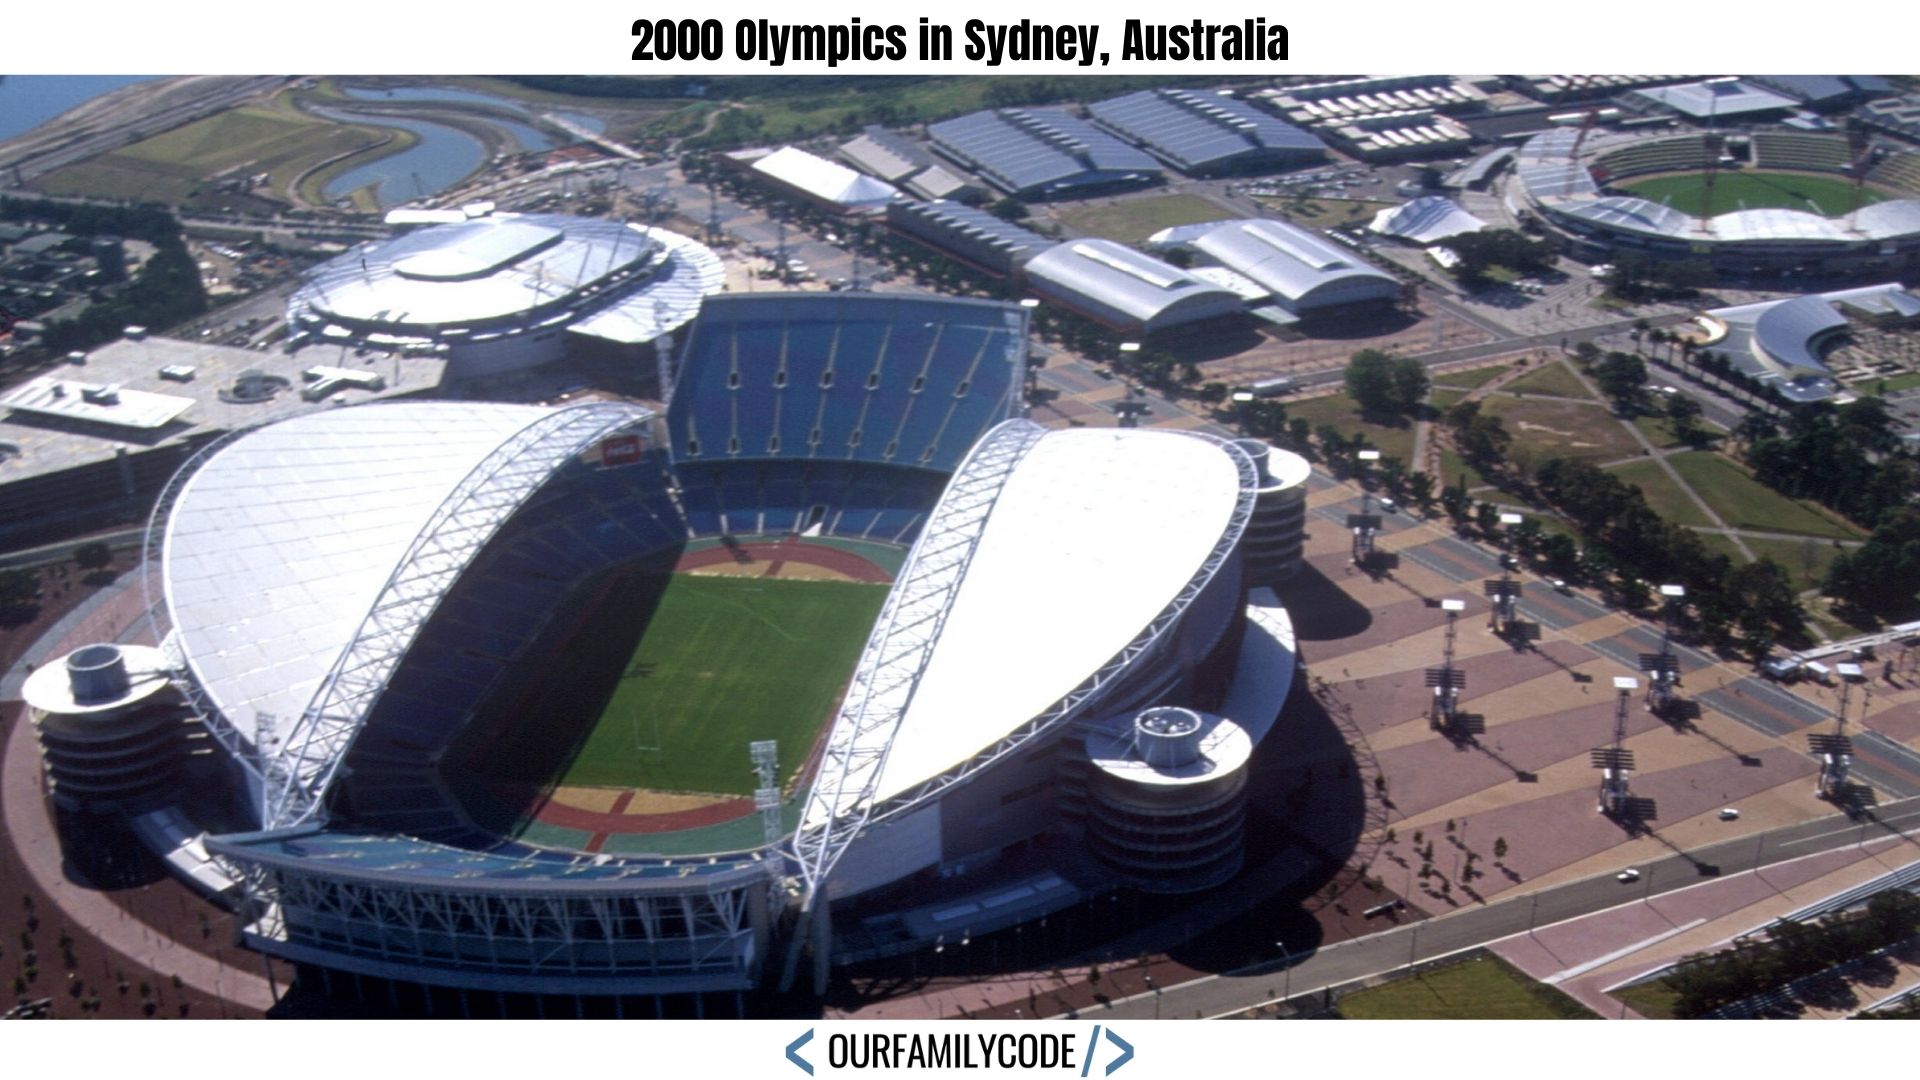 A picture of the Olympic Stadium from the 2000 Olympics in Sydney, Australia.